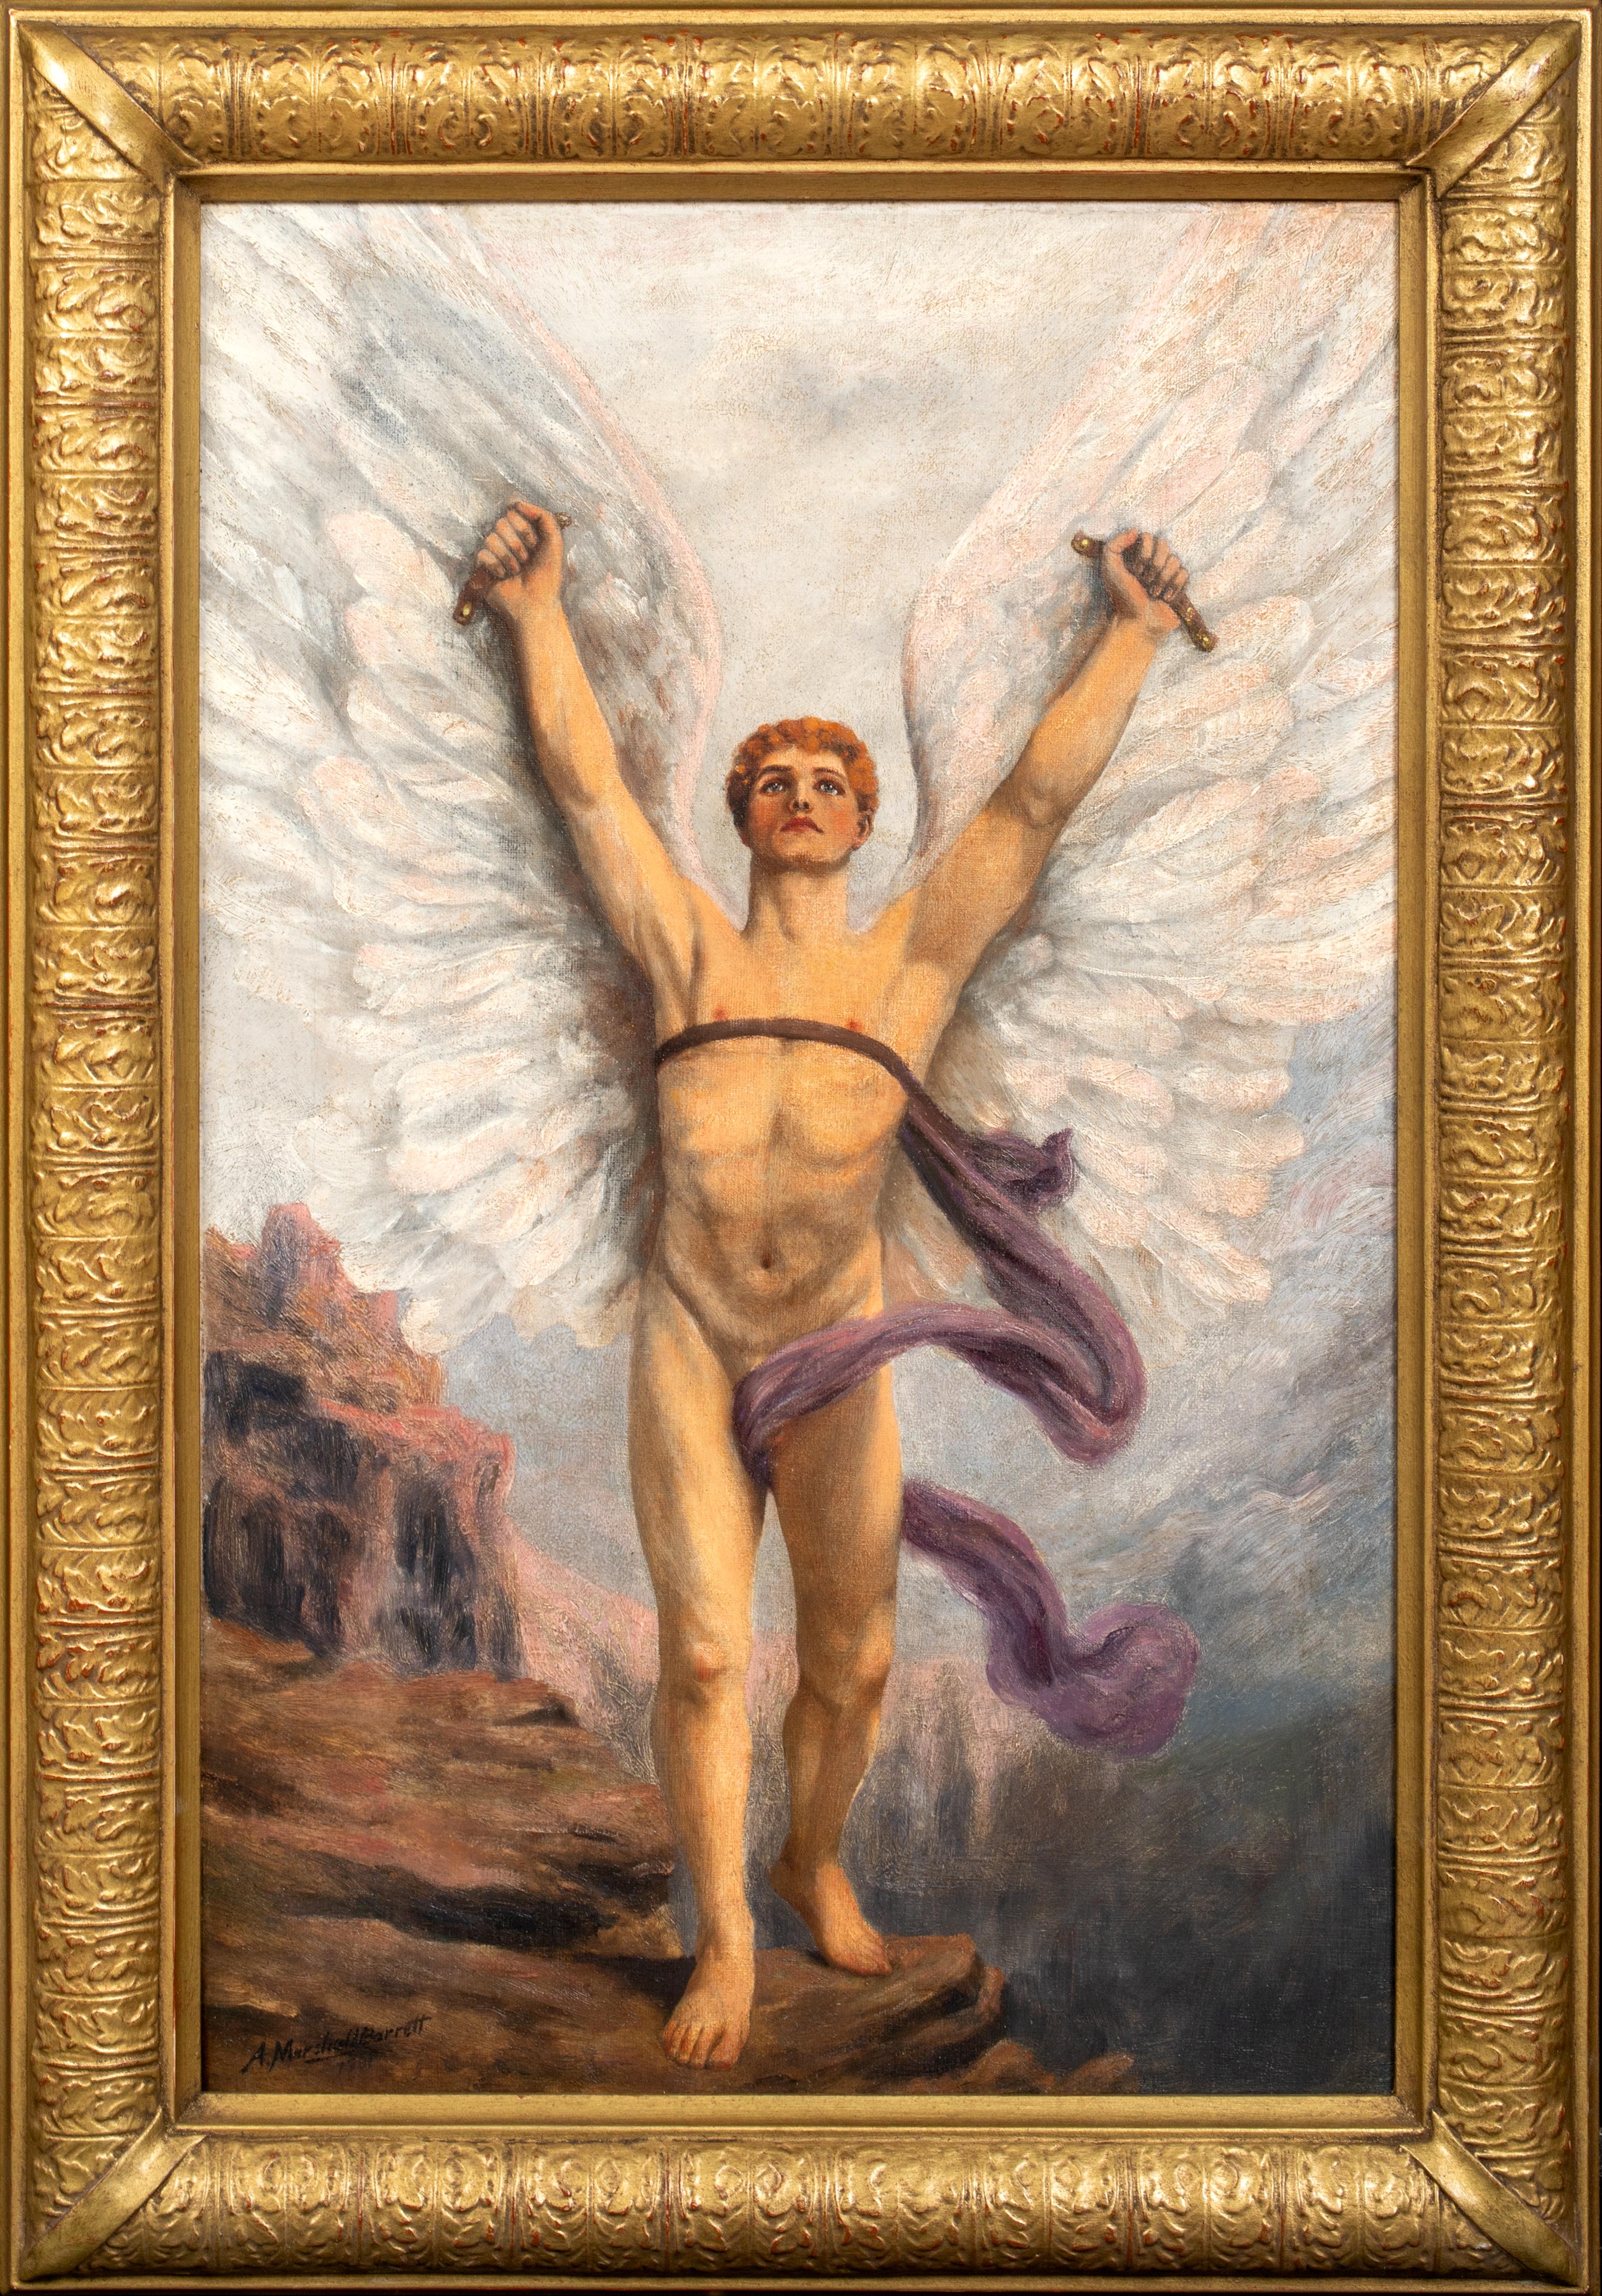 Unknown Nude Painting - Icarus, 19th Century follower of William Blake (1757-1827)